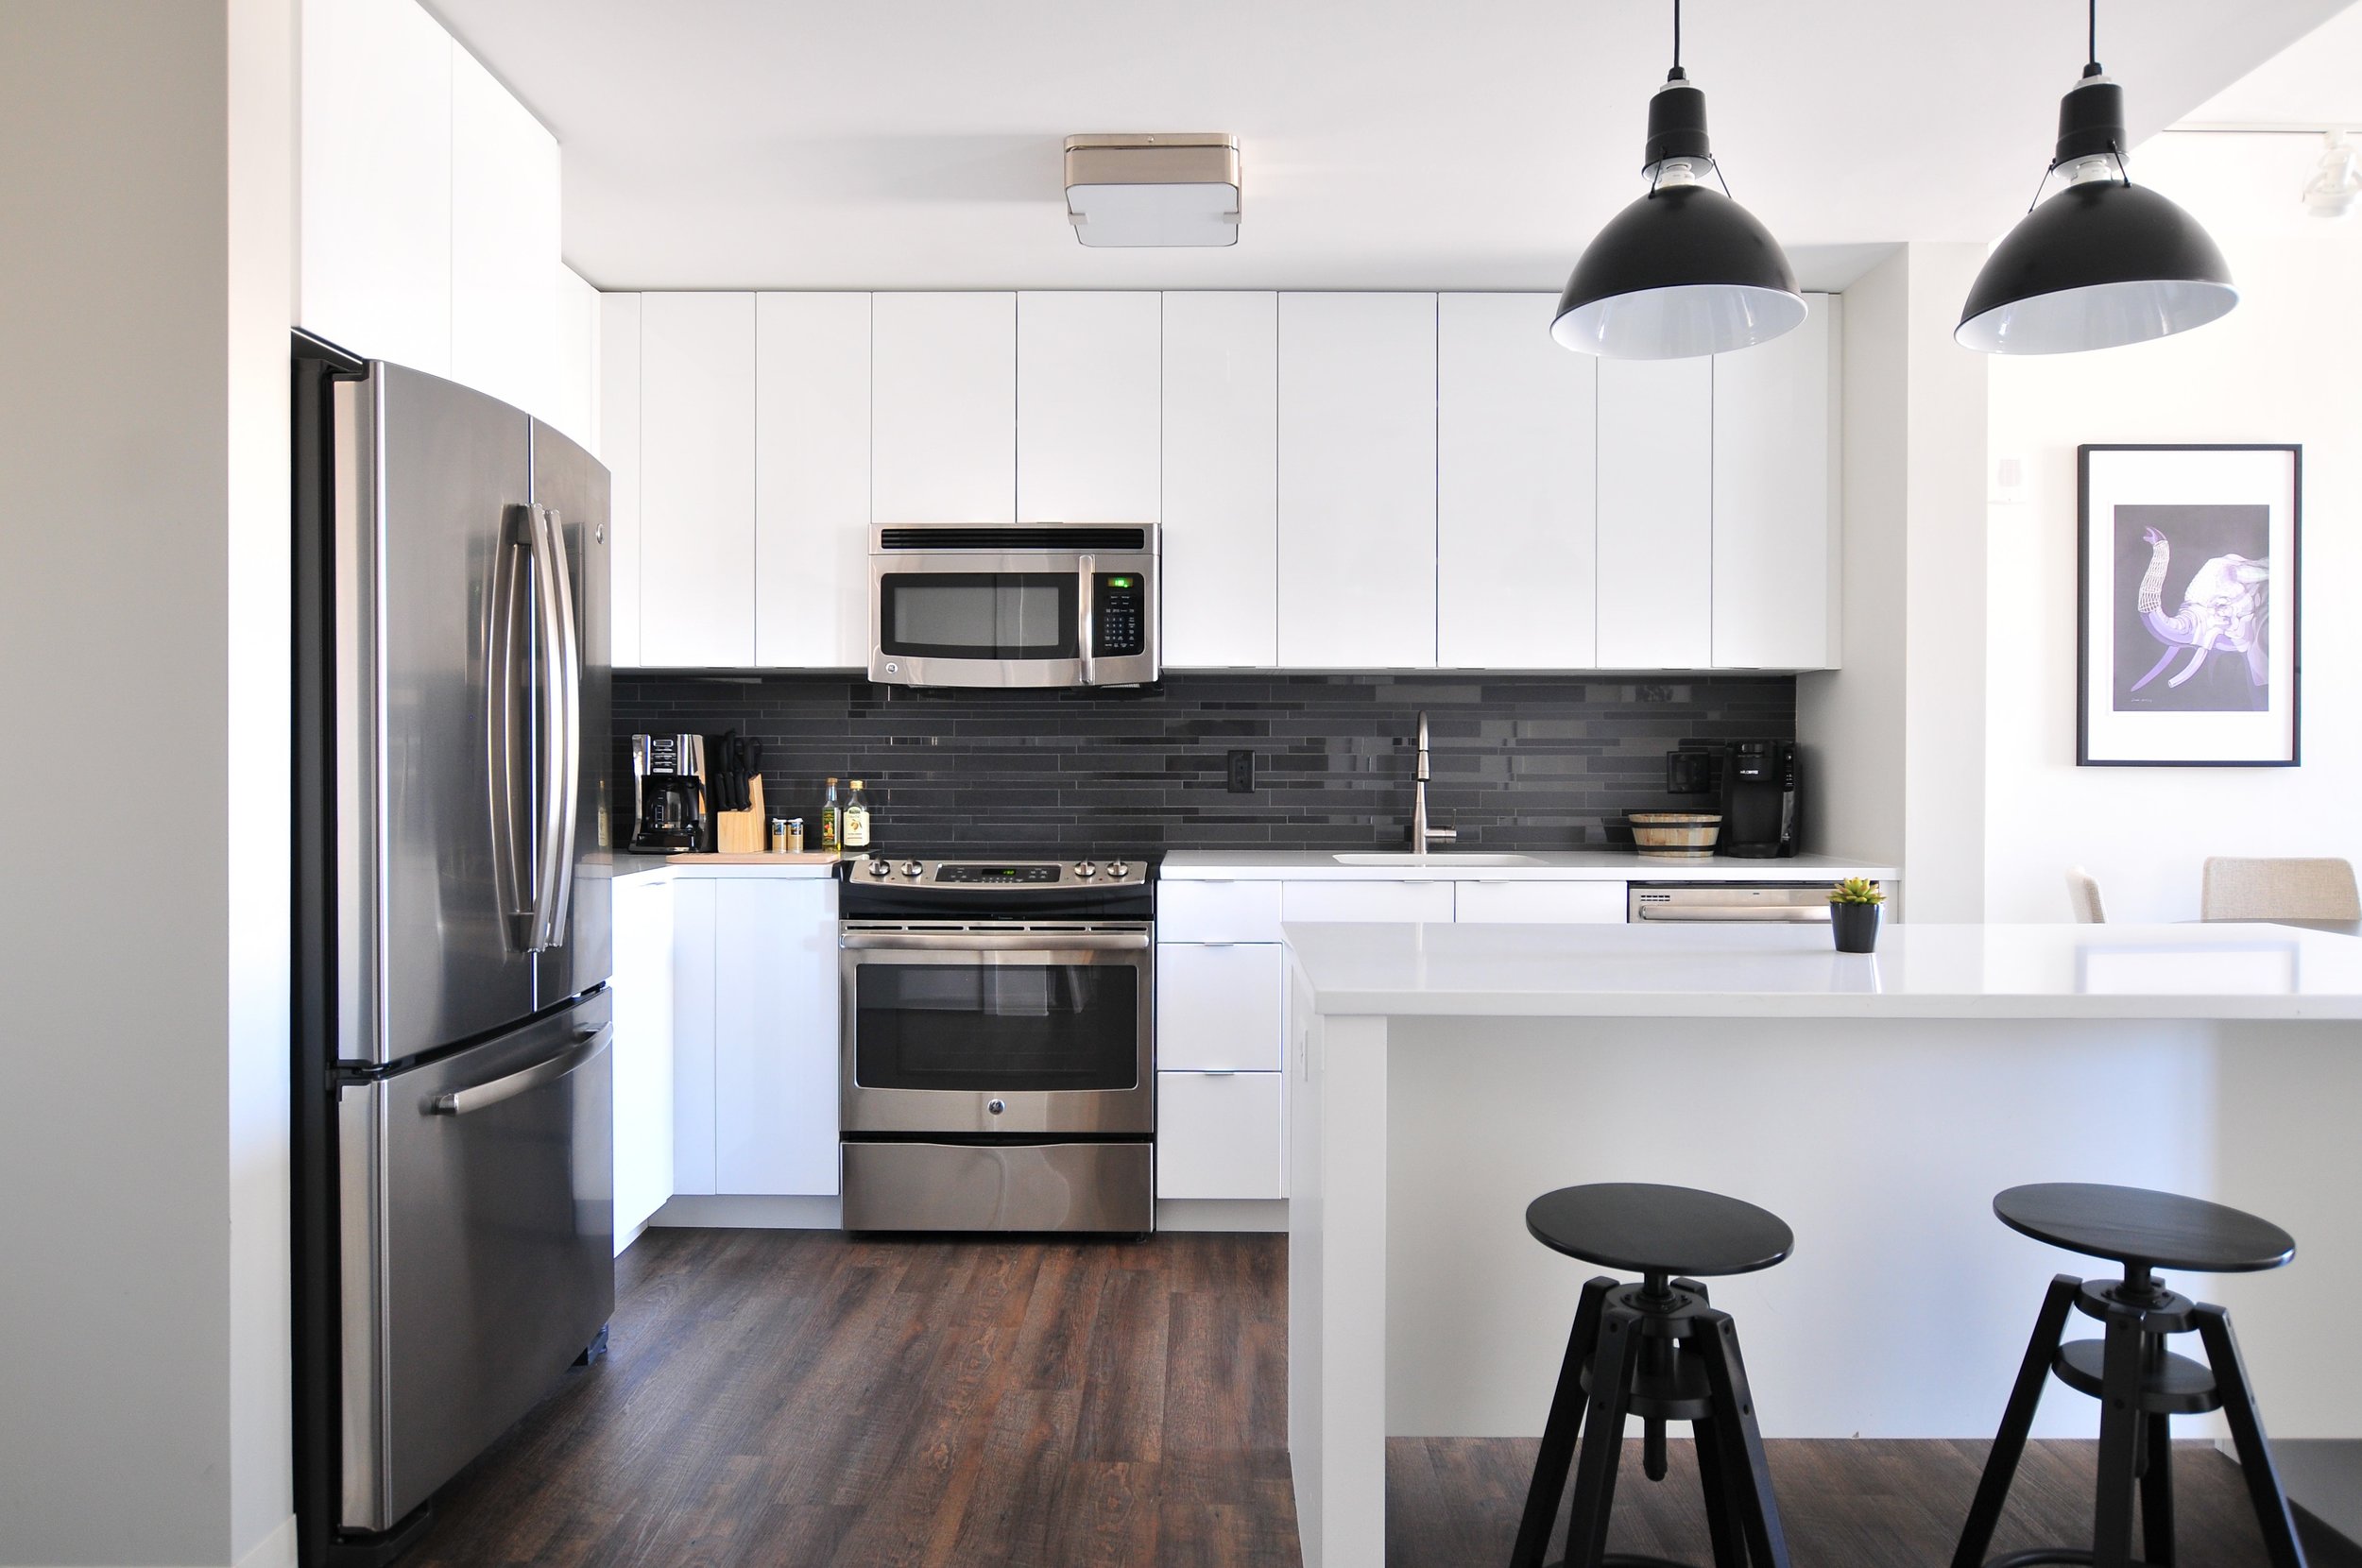  Modern black and white kitchen with breakfast bar and black bar stool.  